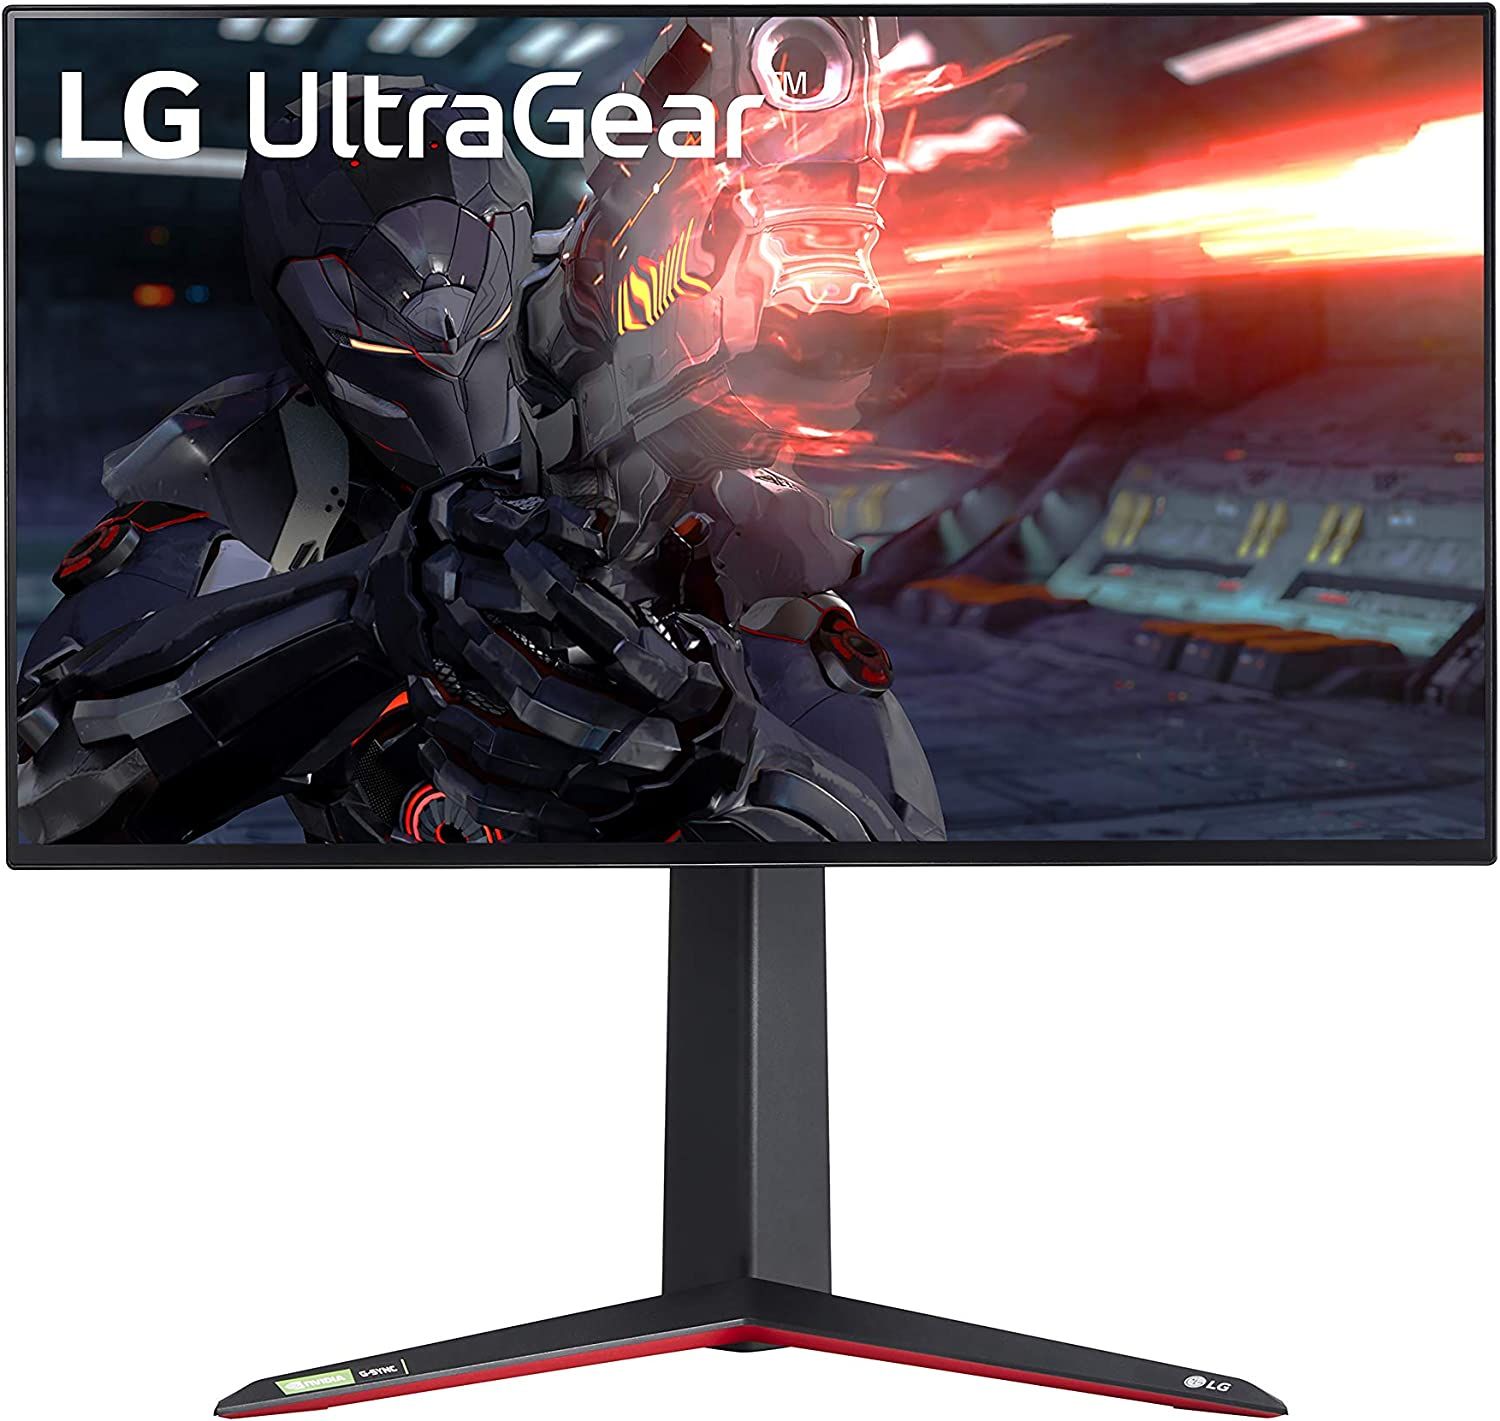 Buy LG 27GP850-B from £374.80 (Today) – Best Deals on